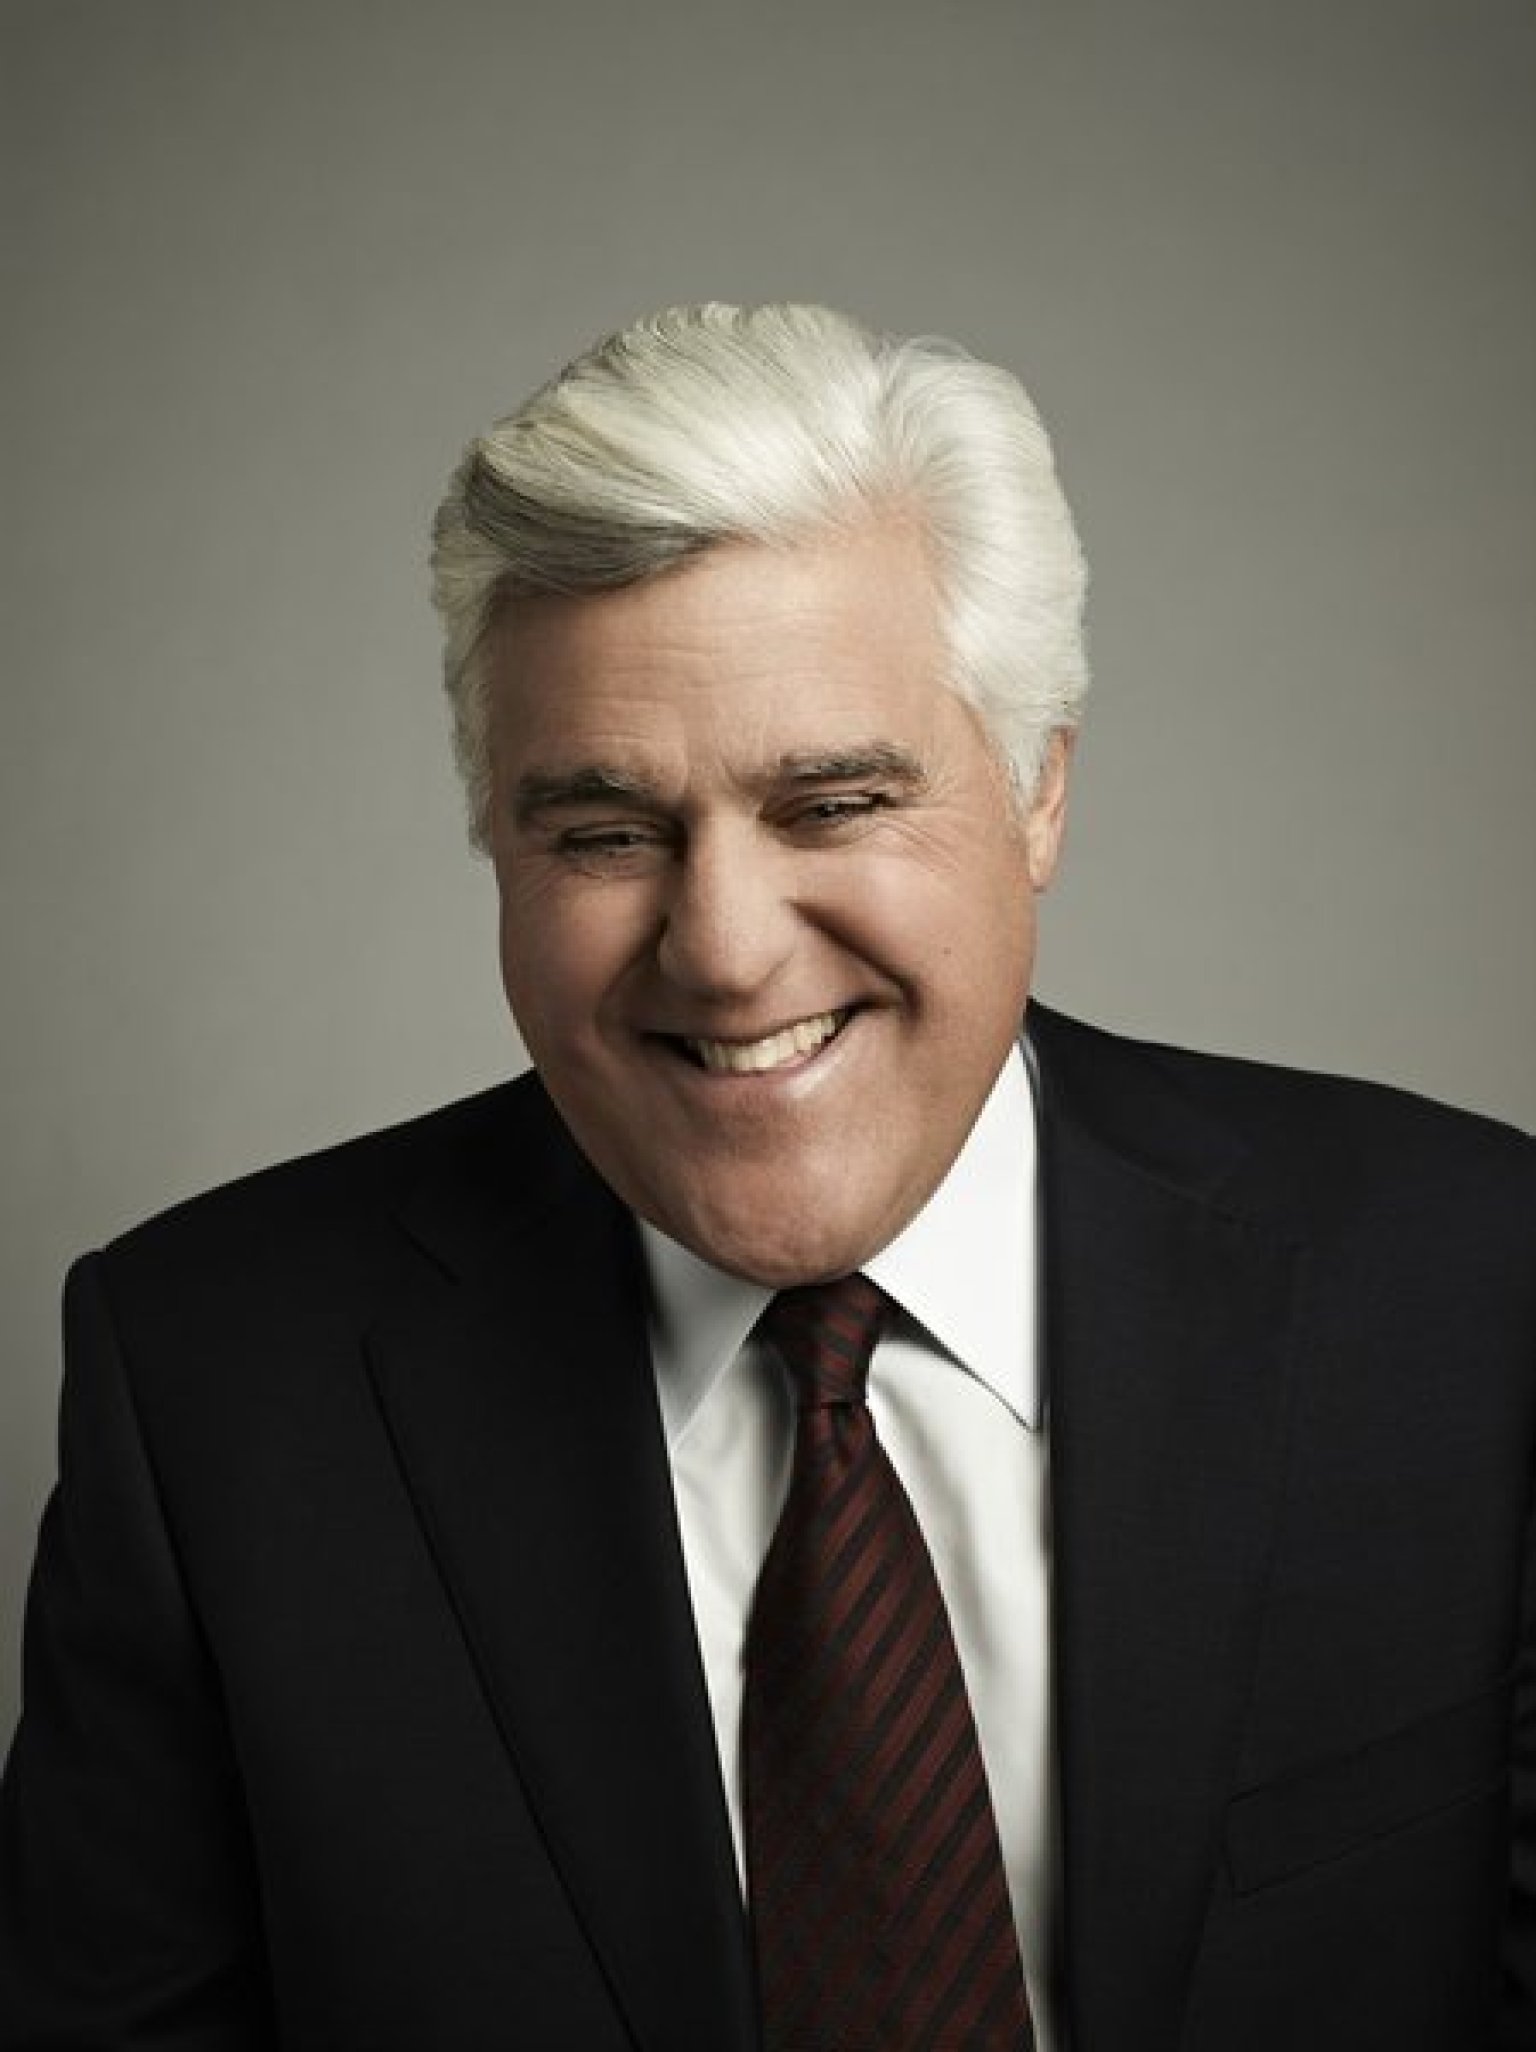 jay-leno-young